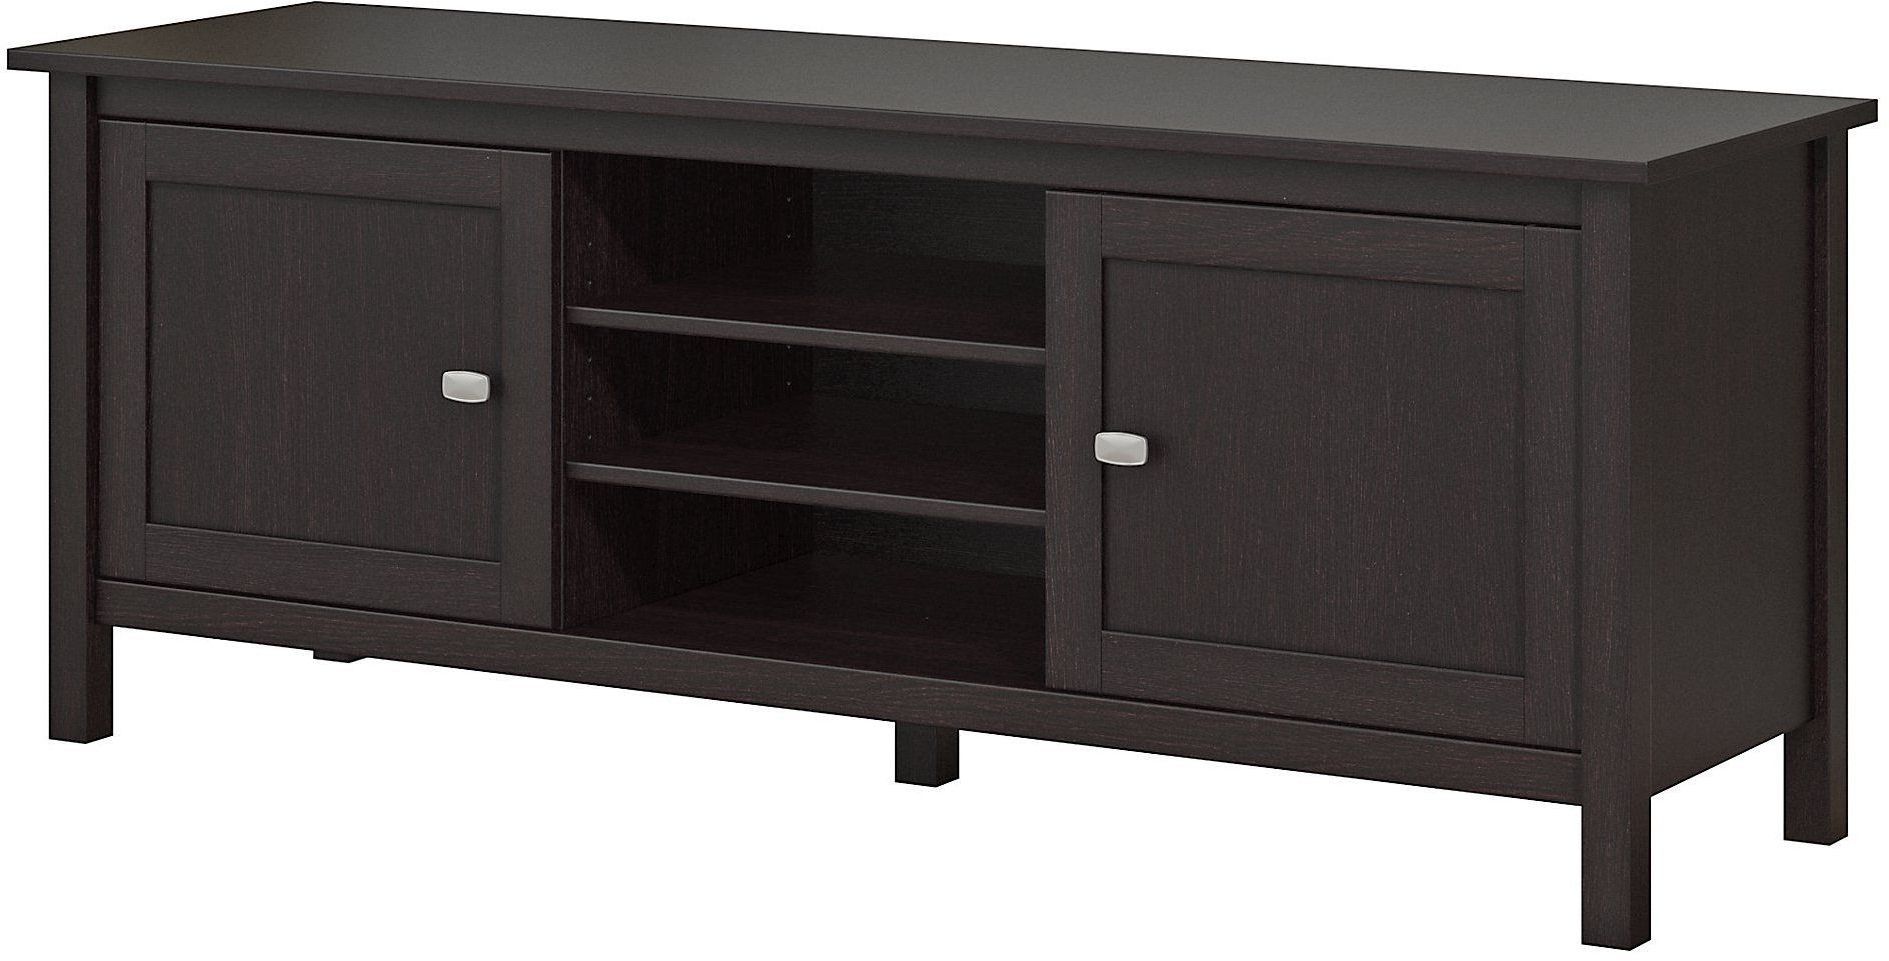 Broadview Espresso Oak 65" Tv Stand From Bush | Coleman Throughout Neilsen Tv Stands For Tvs Up To 65" (View 17 of 20)